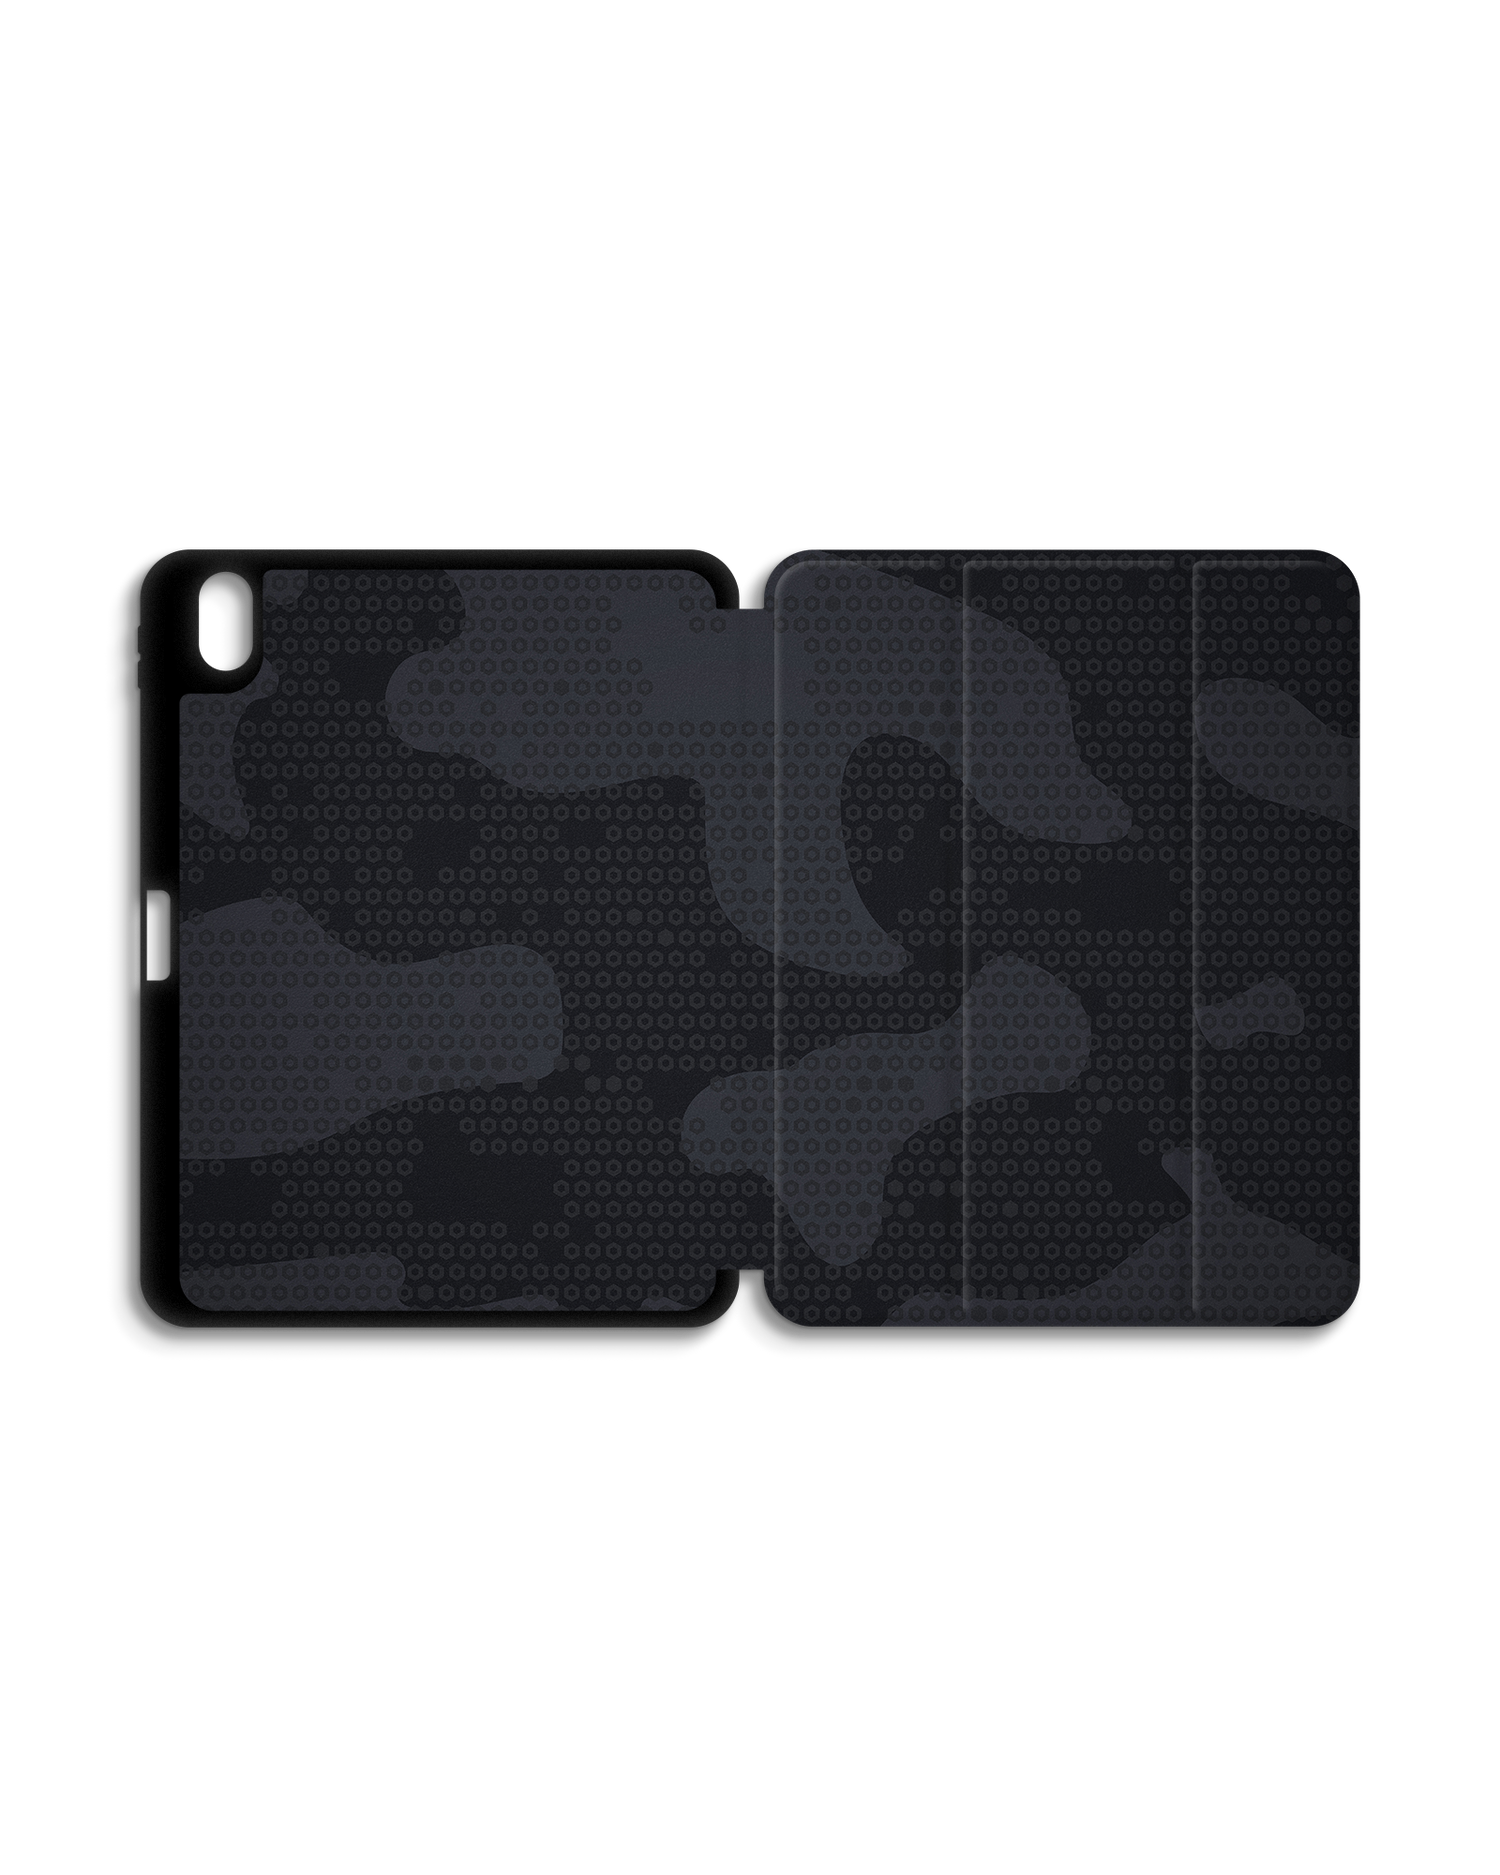 Spec Ops Dark iPad Case with Pencil Holder for Apple iPad (10th Generation): Opened exterior view